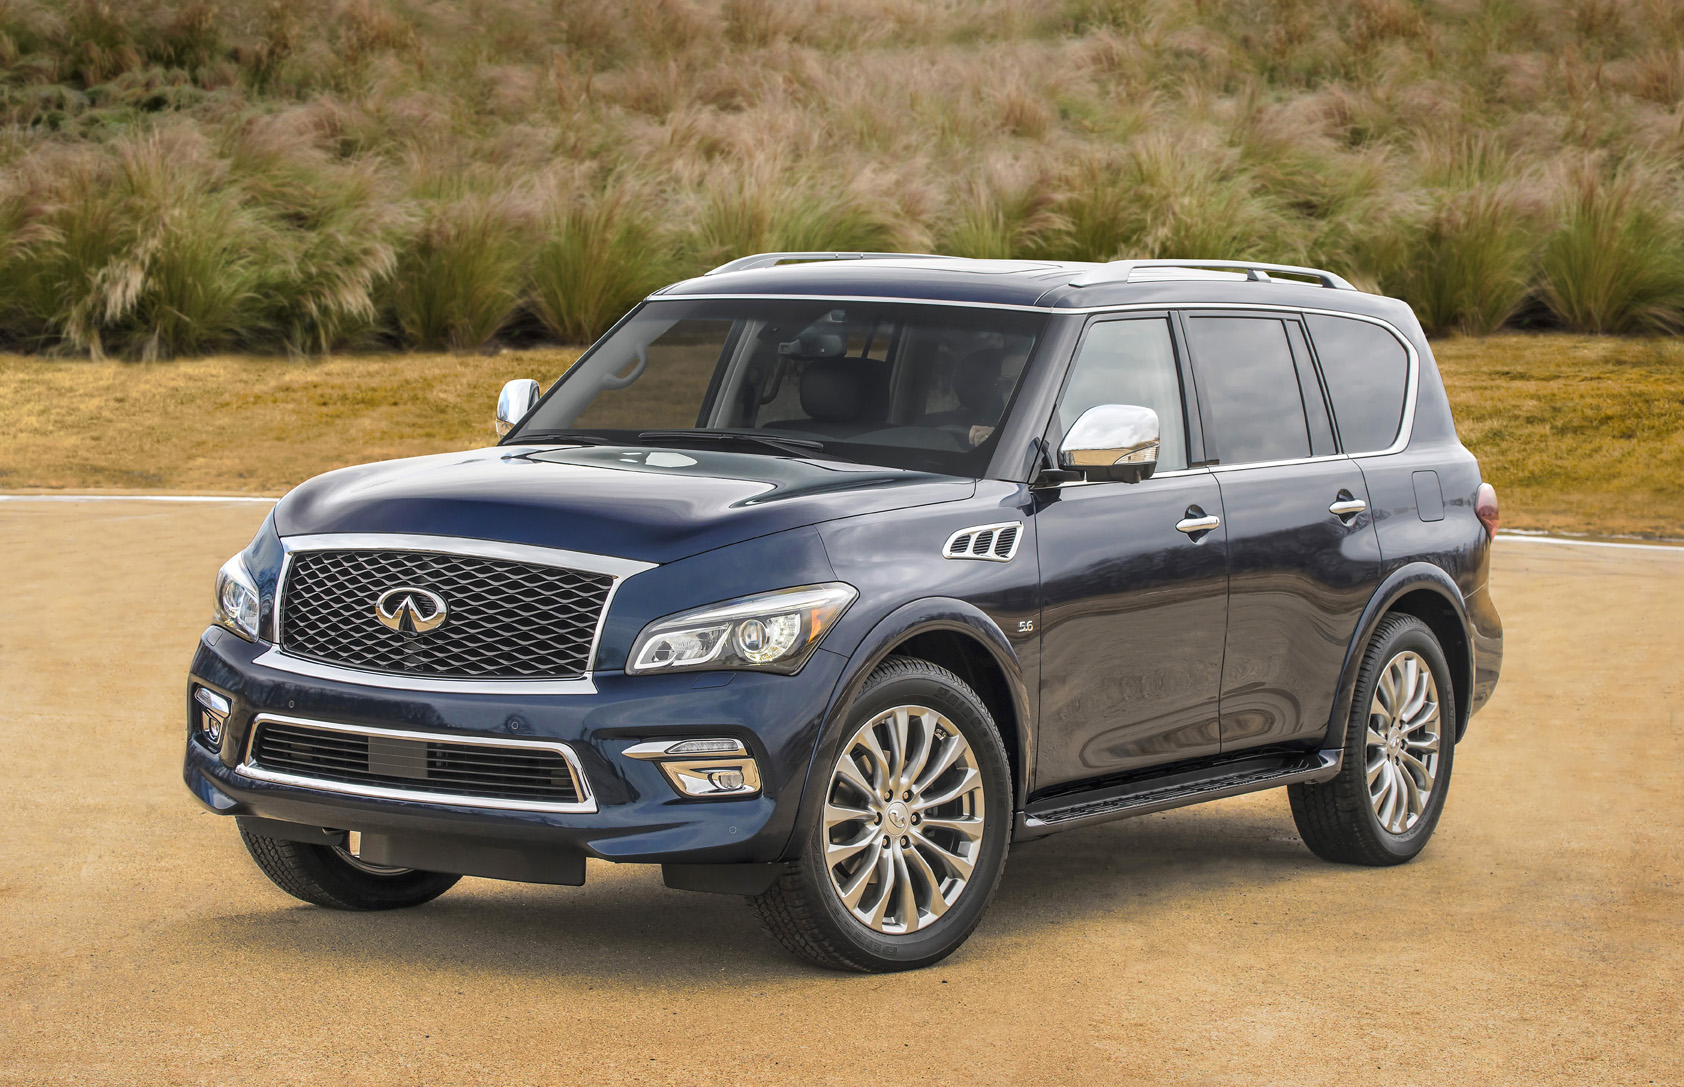 Franklin, Tenn. (July 8, 2015) - Infiniti has announced that for the third year in a row its QX80 full-size luxury SUV was recognized as best-in-class in the 2015 AutoPacific Vehicle Satisfaction Awards (VSA) for the Luxury/Large SUV segment. Now in its 19th year, AutoPacific’s VSA identifies the most satisfying vehicles on the market. An industry benchmark for measuring how satisfied an owner is with his/her new vehicle, VSAs are based on survey responses from over 66,000 owners of new 2015 model year cars and light trucks.